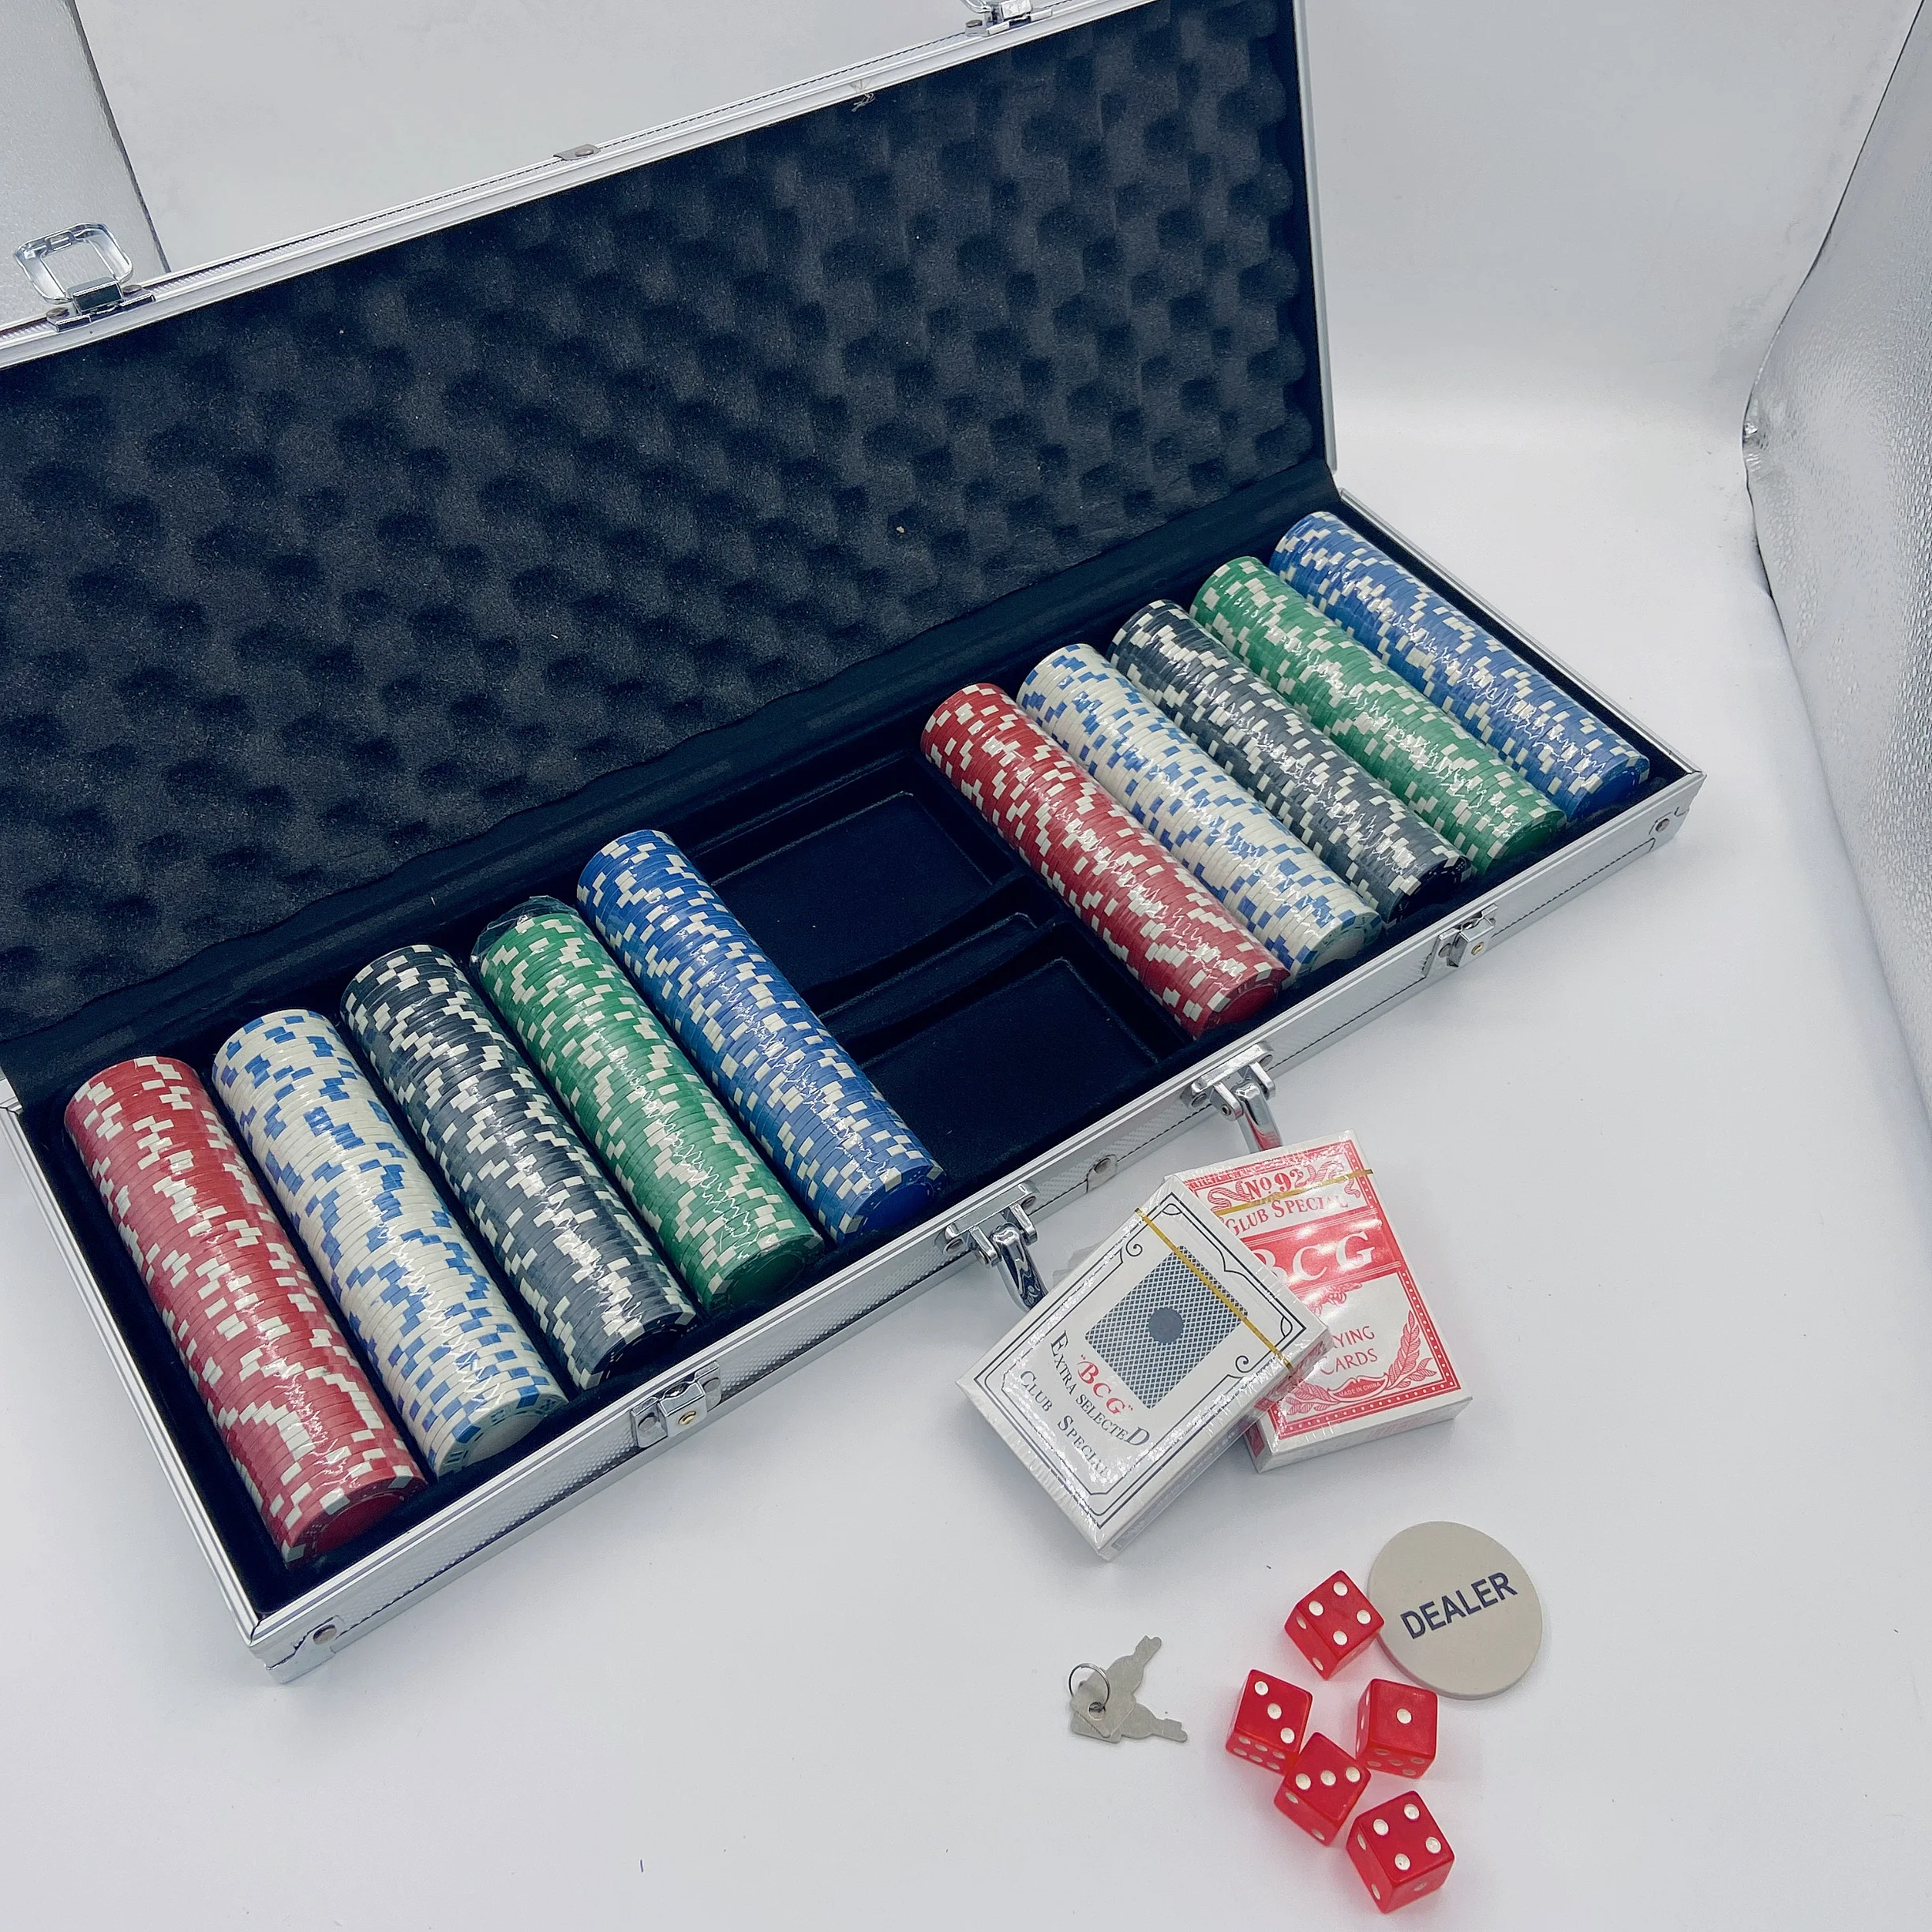 Holds Cards & Dice 650 Poker Chip Silver Aluminum Closeout Case Casino Style w/ Keys 